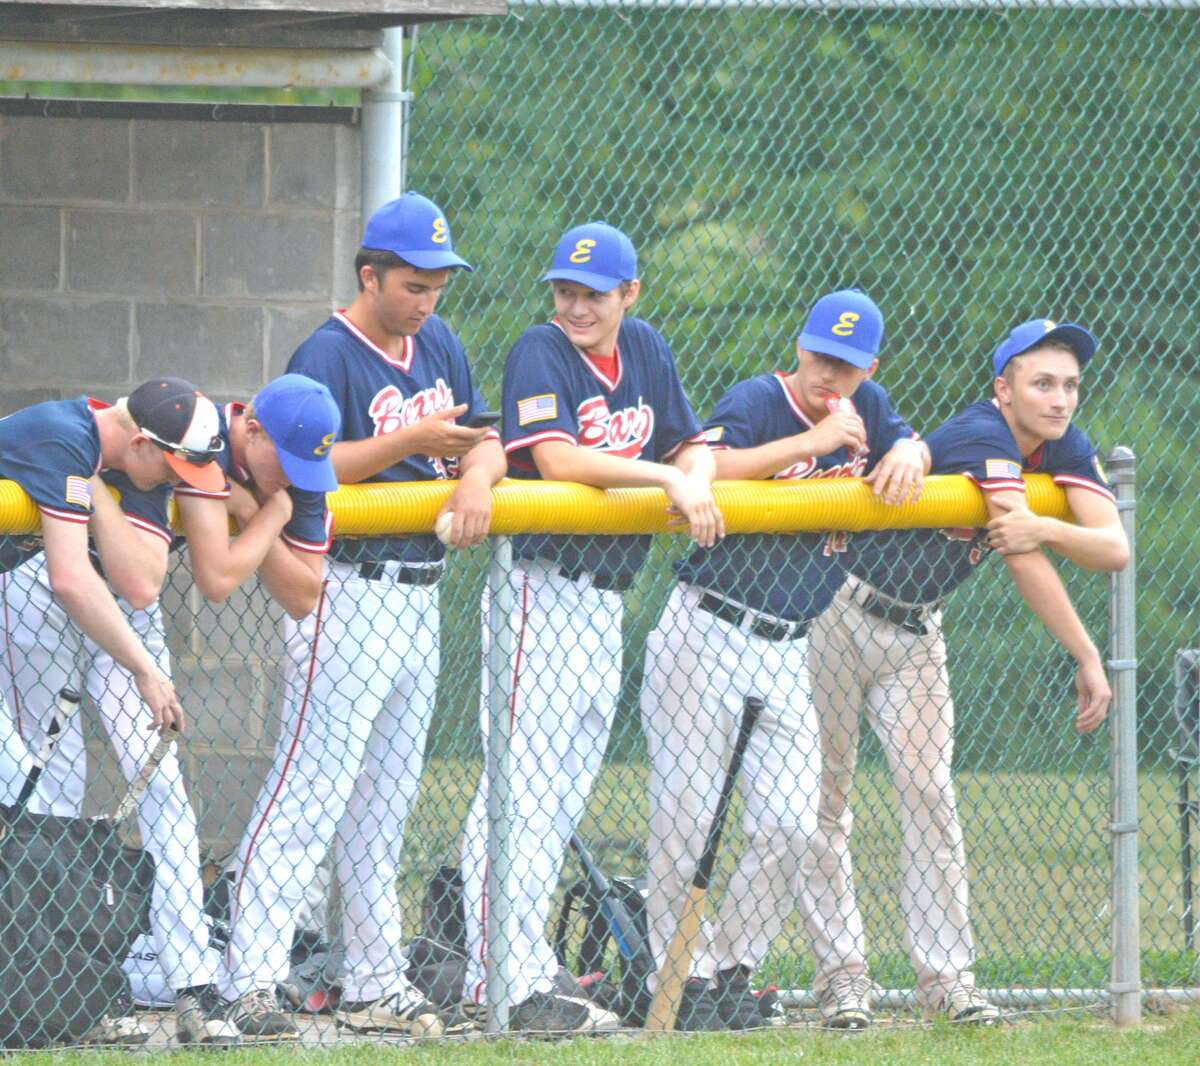 Edwardsville Bears players watch from the dugout during Thursday’s District 22 tournament game against Highland at Hoppe Park.